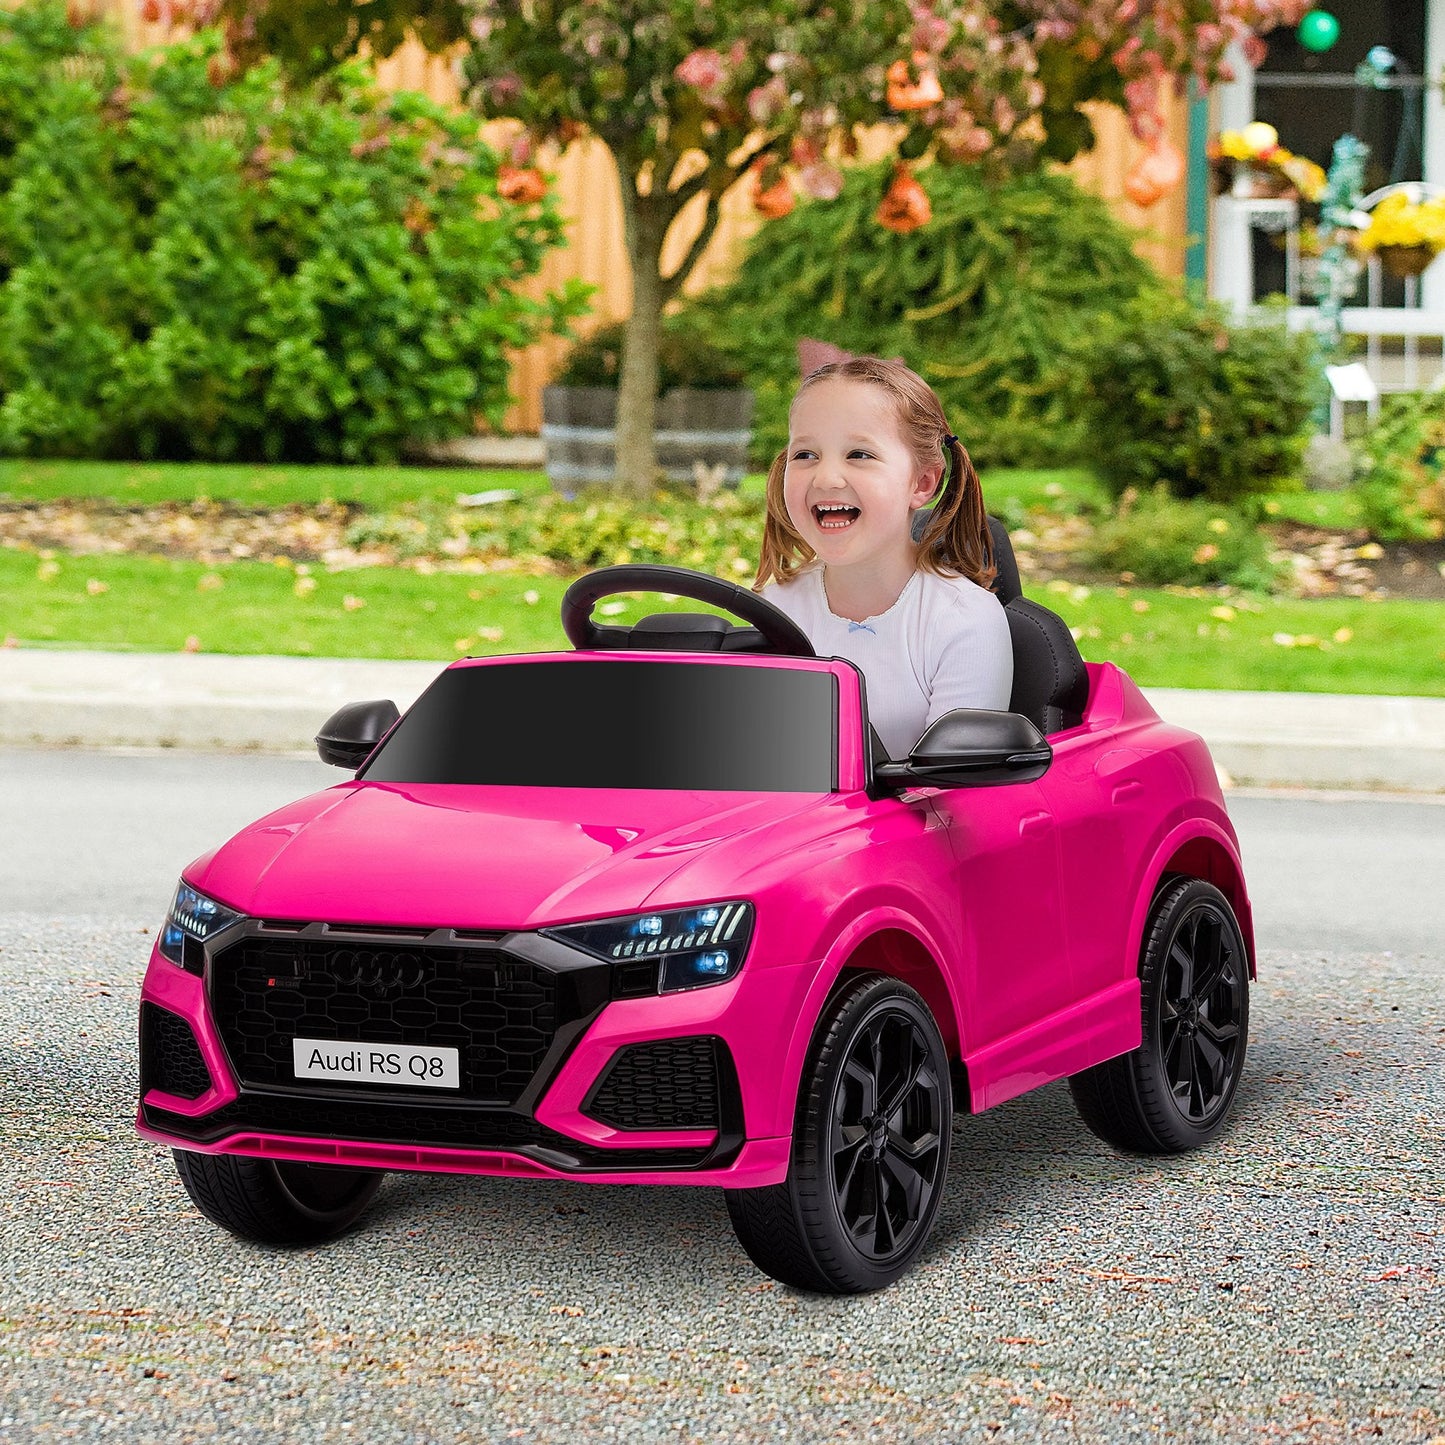 HOMCOM Audi RS Q8 6V Kids Electric Ride On Toy Car with Remote Control, USB & Bluetooth - maplin.co.uk